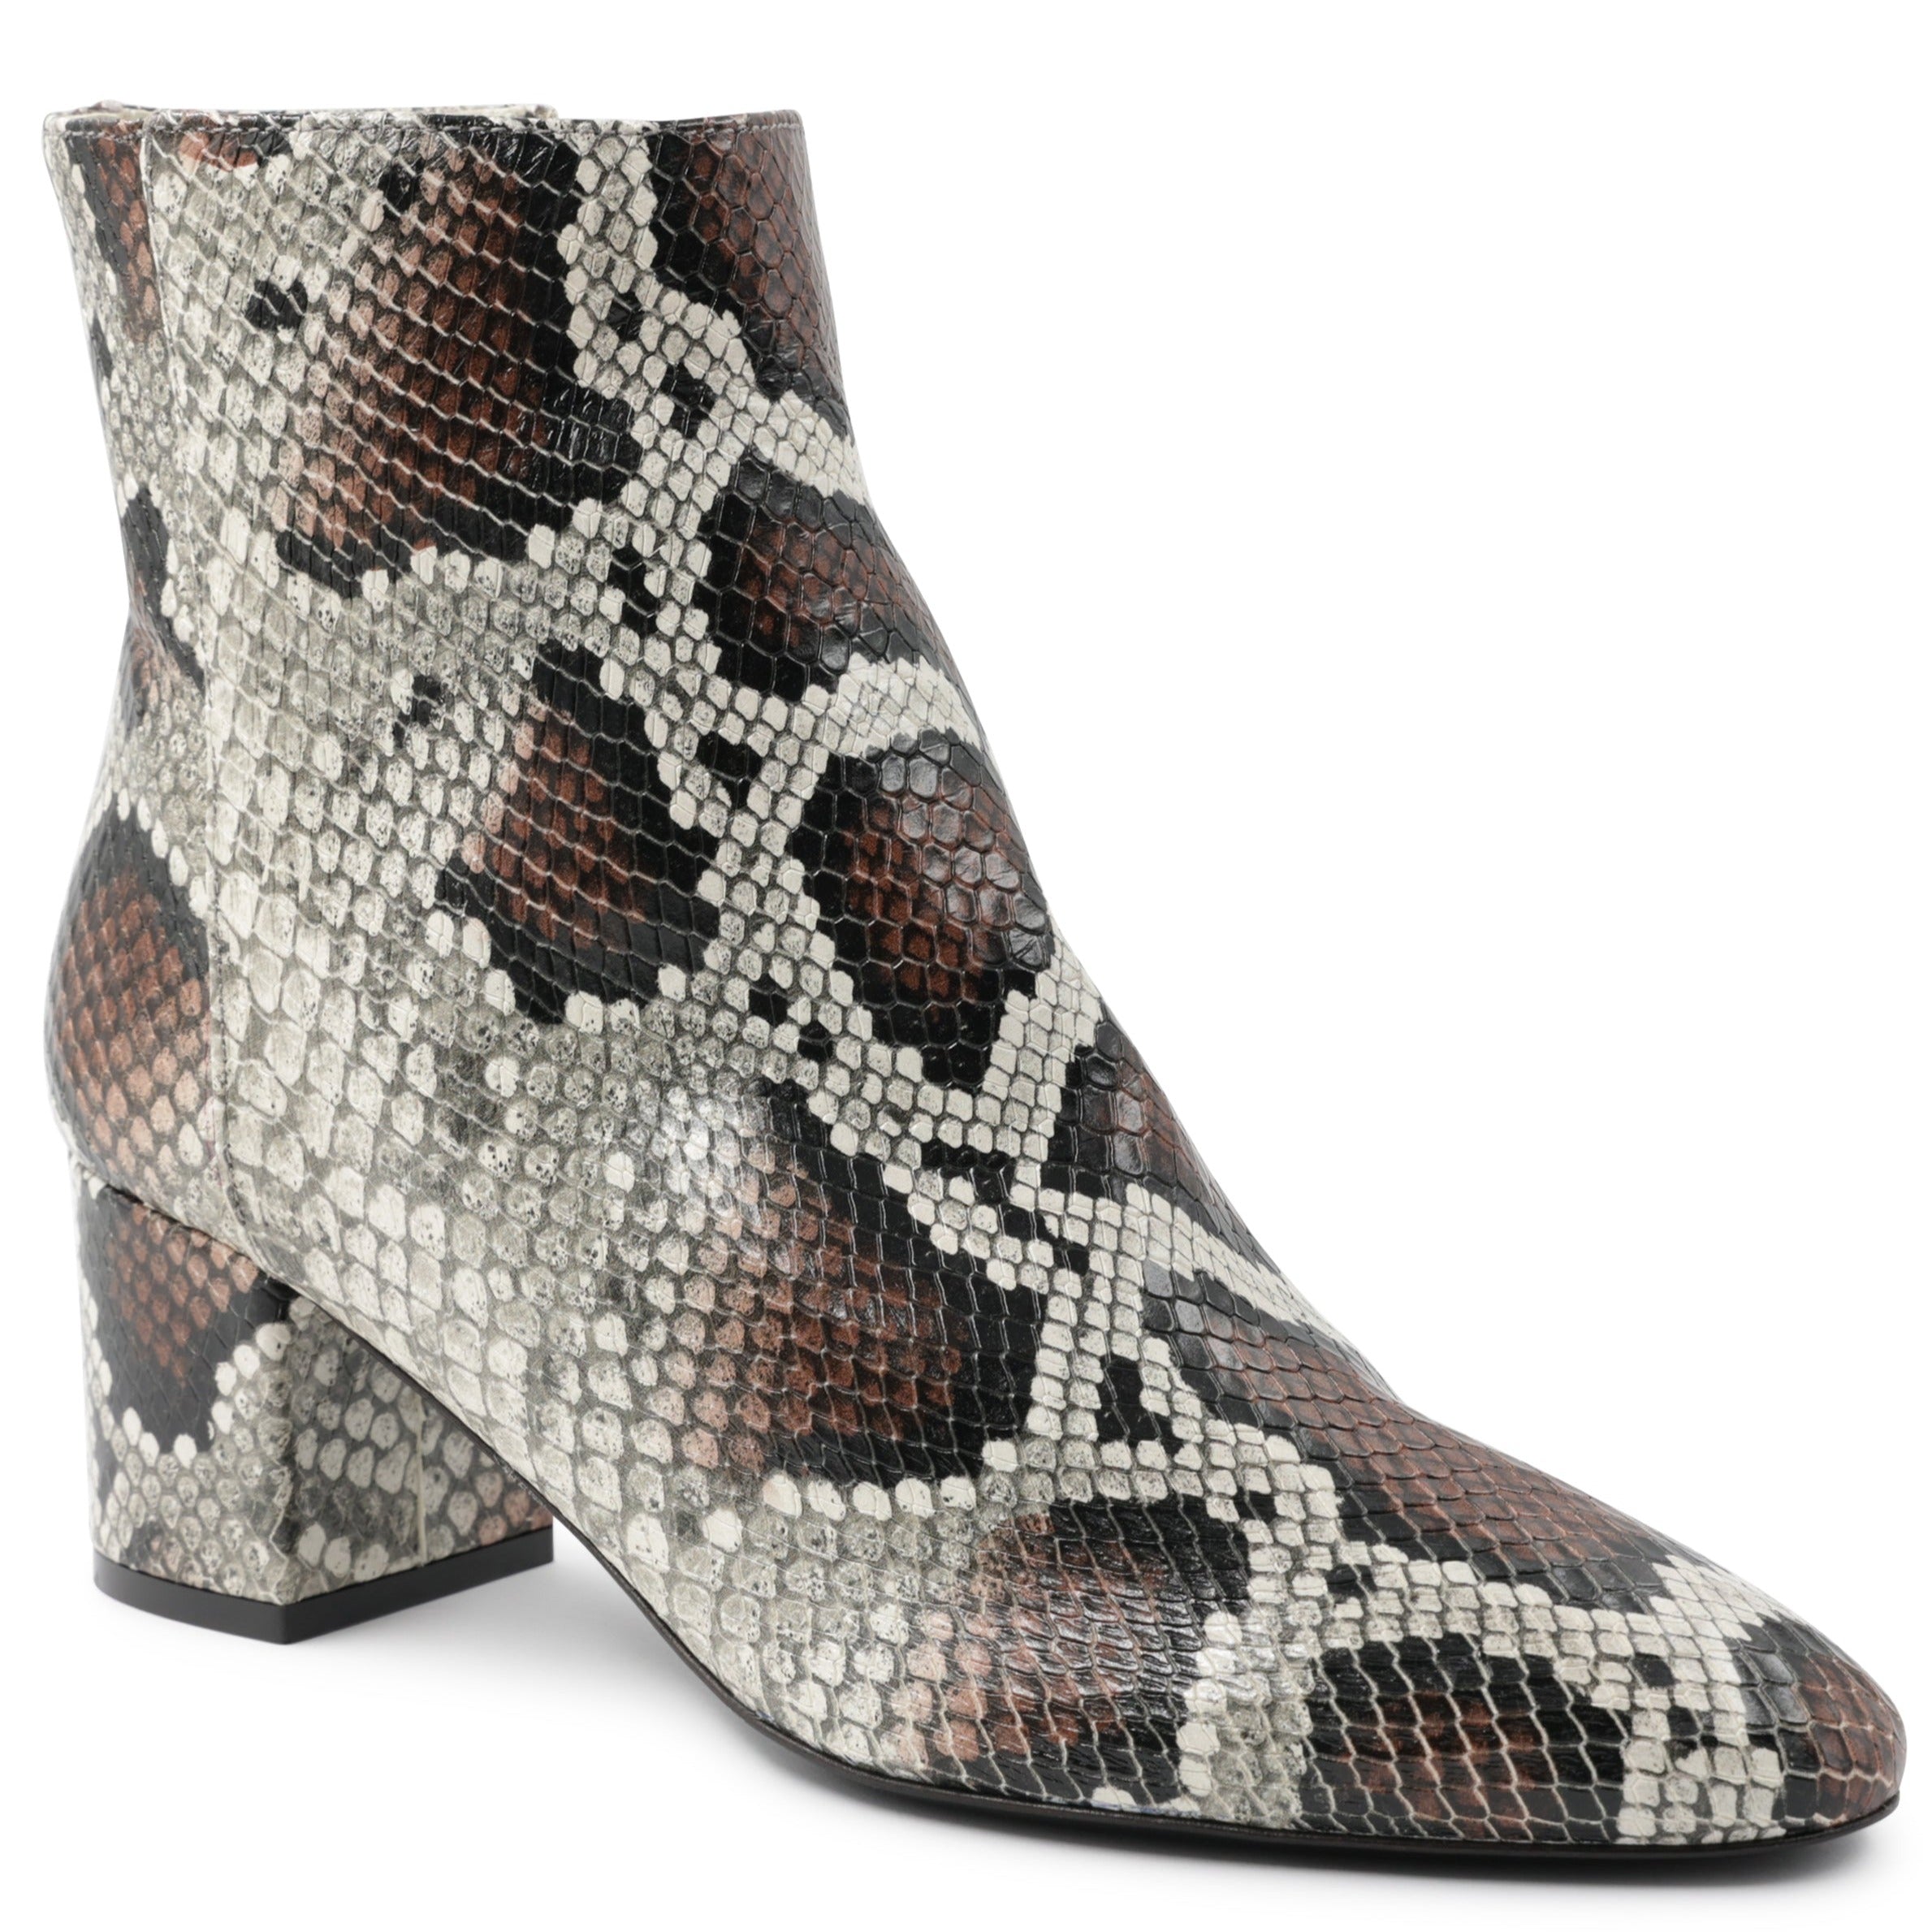 Image of Vinny Leather Ankle Boot - Roccia/Tan Snake